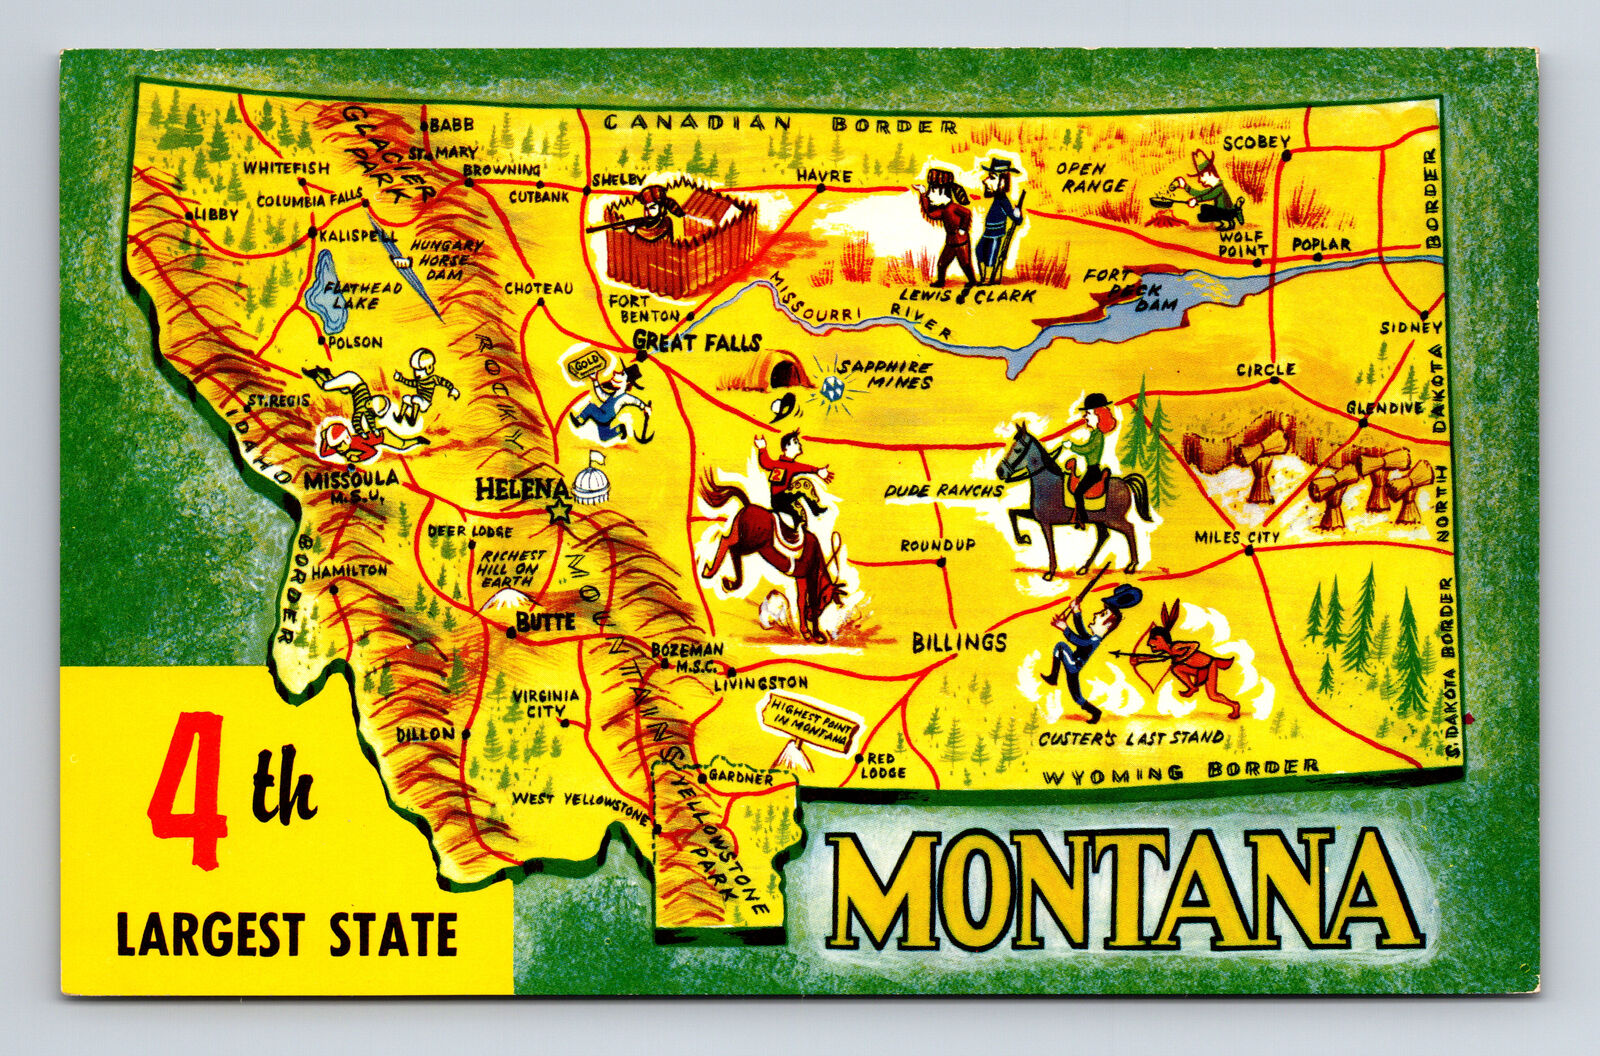 Pictorial Tourist Attraction Map Greetings From State of Montana MT Postcard